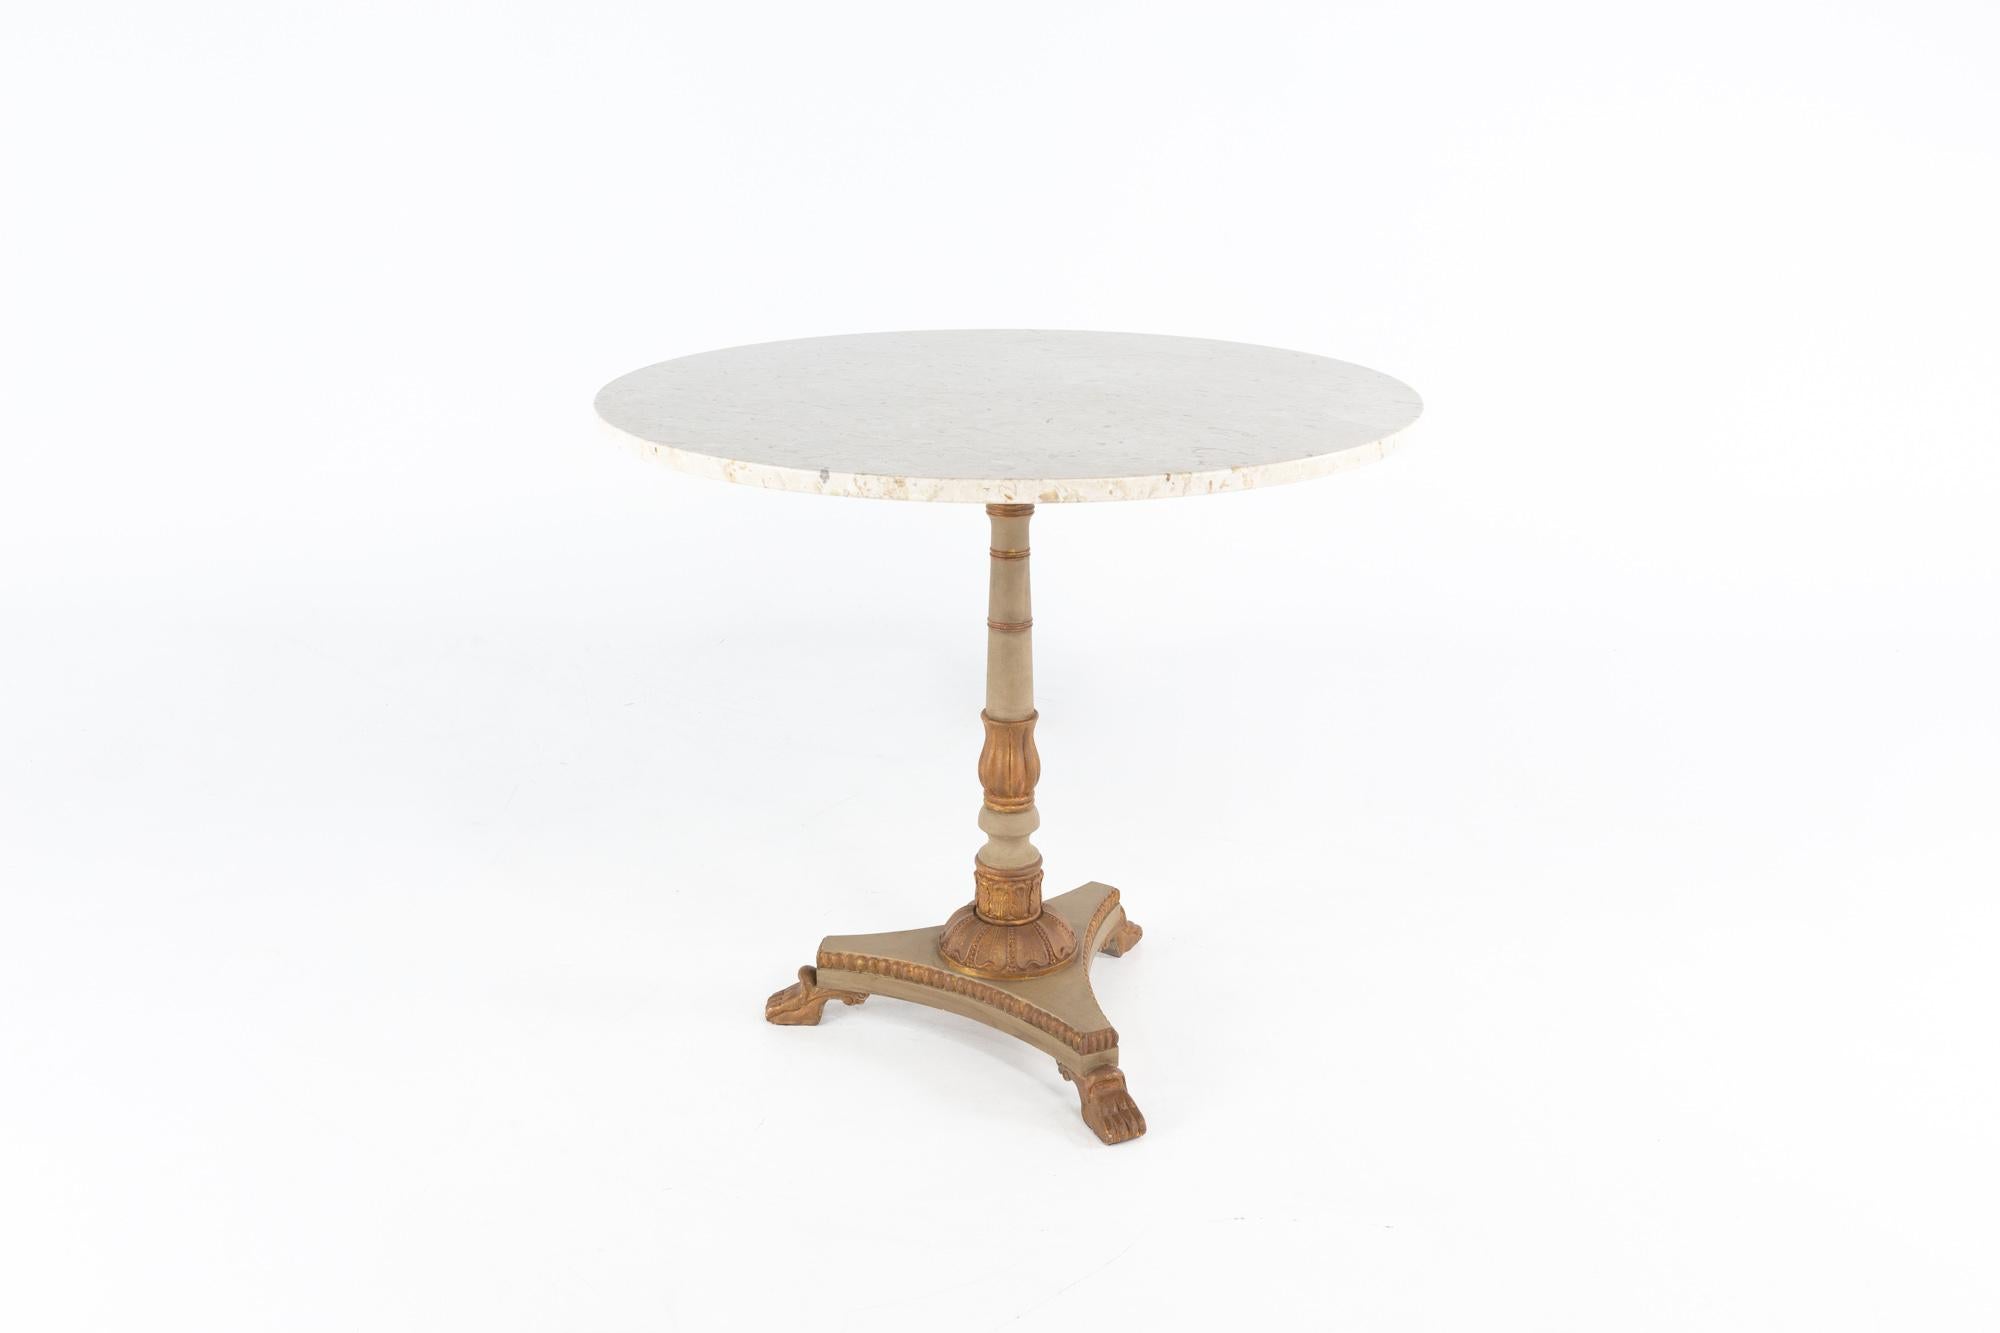 Cafe table marble top

This table measures: 36 wide x 36 deep x 31 inches high, with a chair clearance of 28.5 inches

This table is in Good Vintage Condition with missing hardware for top attachment, minor marks, dents, and wear.

About